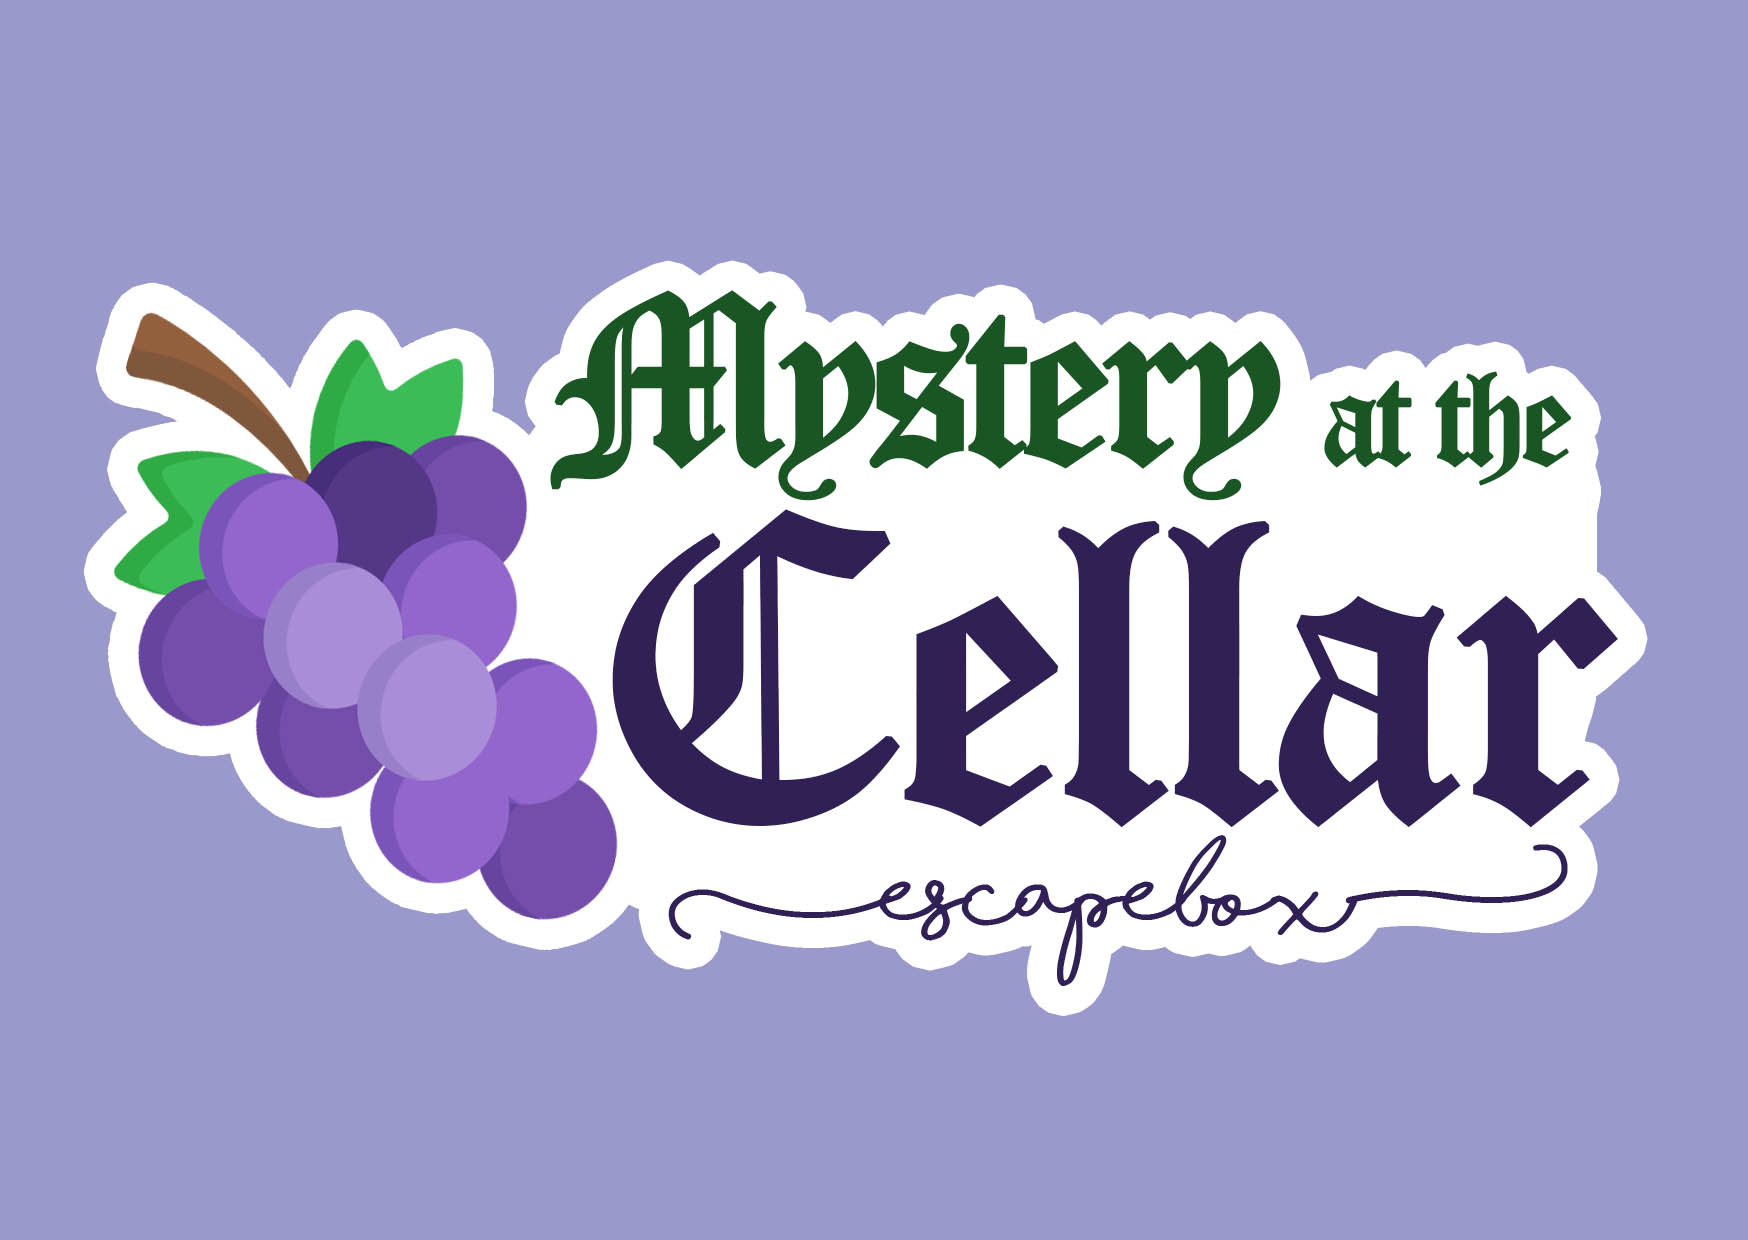 Mystery at the cellar